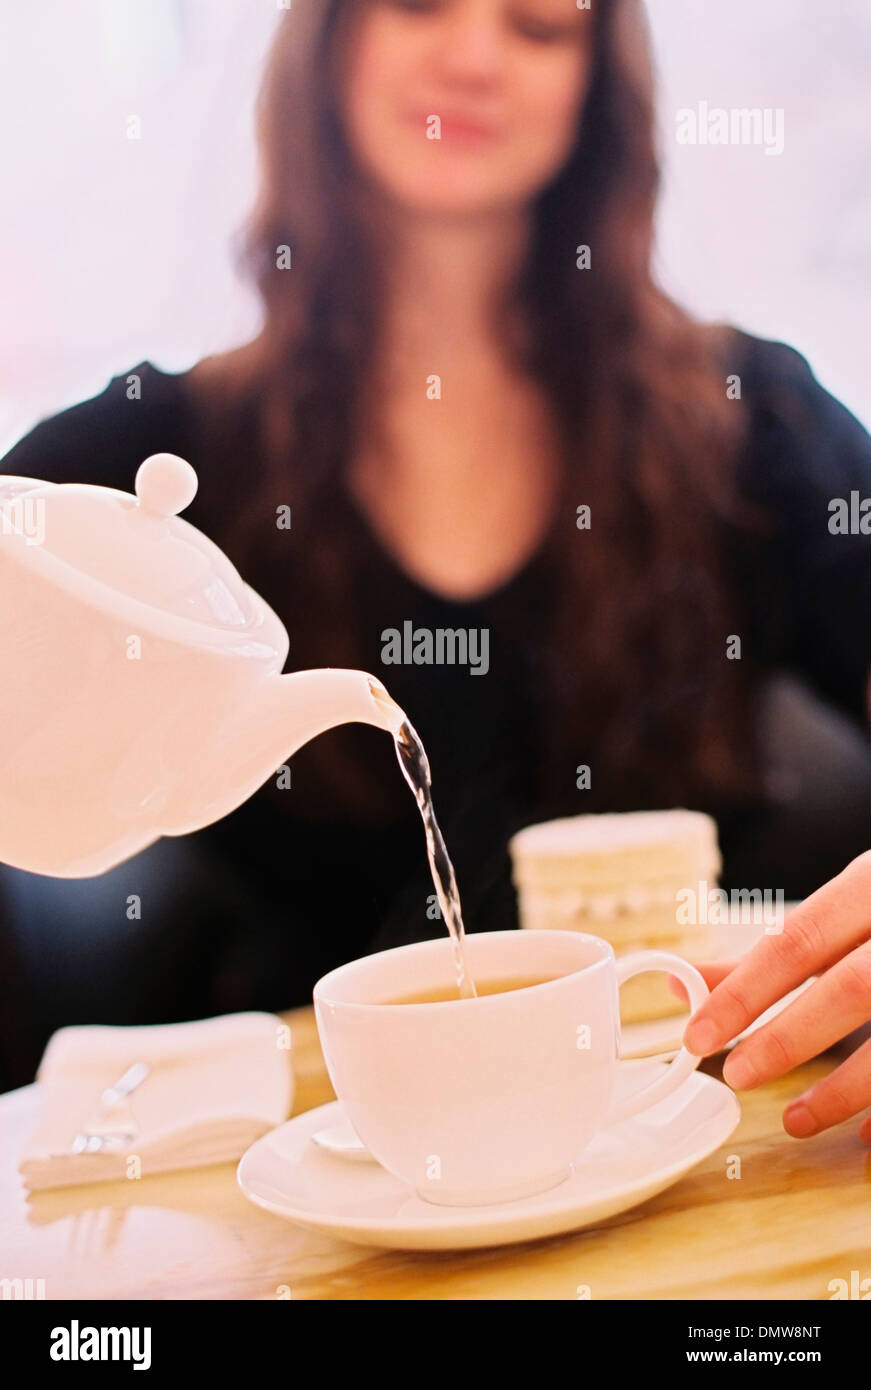 A woman pouring a cup of tea Stock Photo